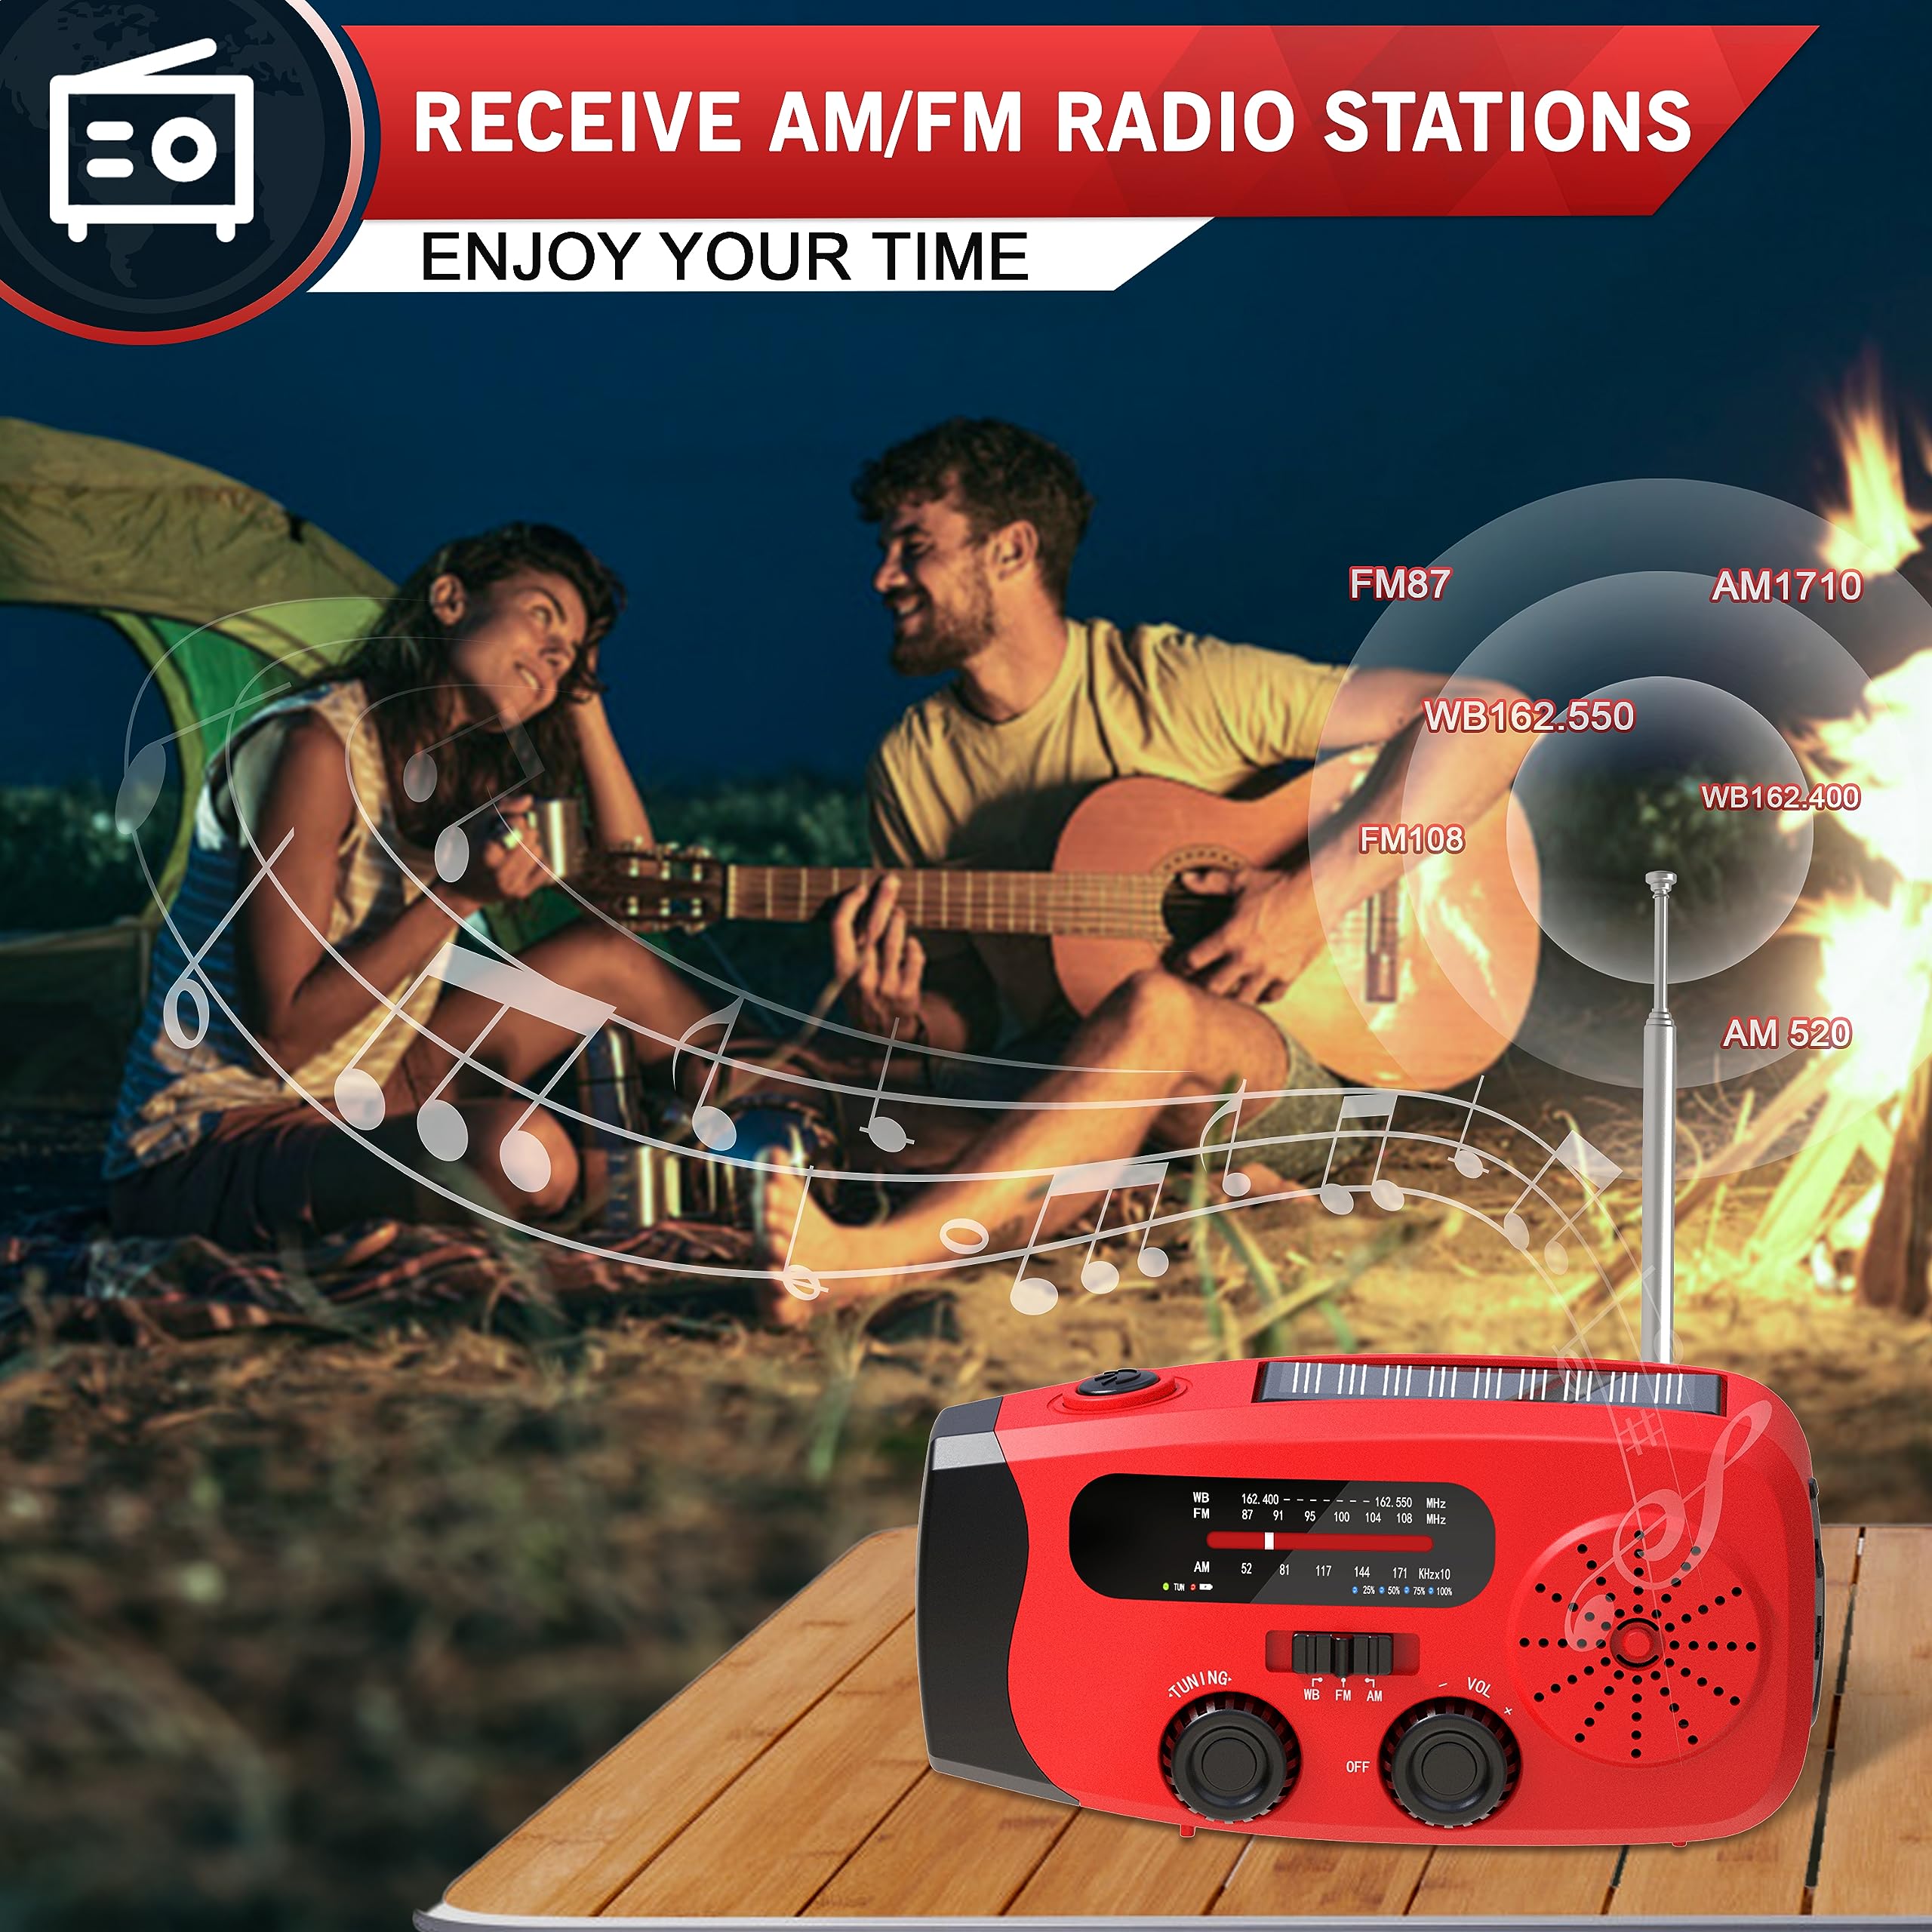 Emgykit Hand Crank Emergency Radio - 7400mWh AM/FM/NOAA Weather Radio with LED Flashlight,USB Charged and Solar Power for Emergency,Camping